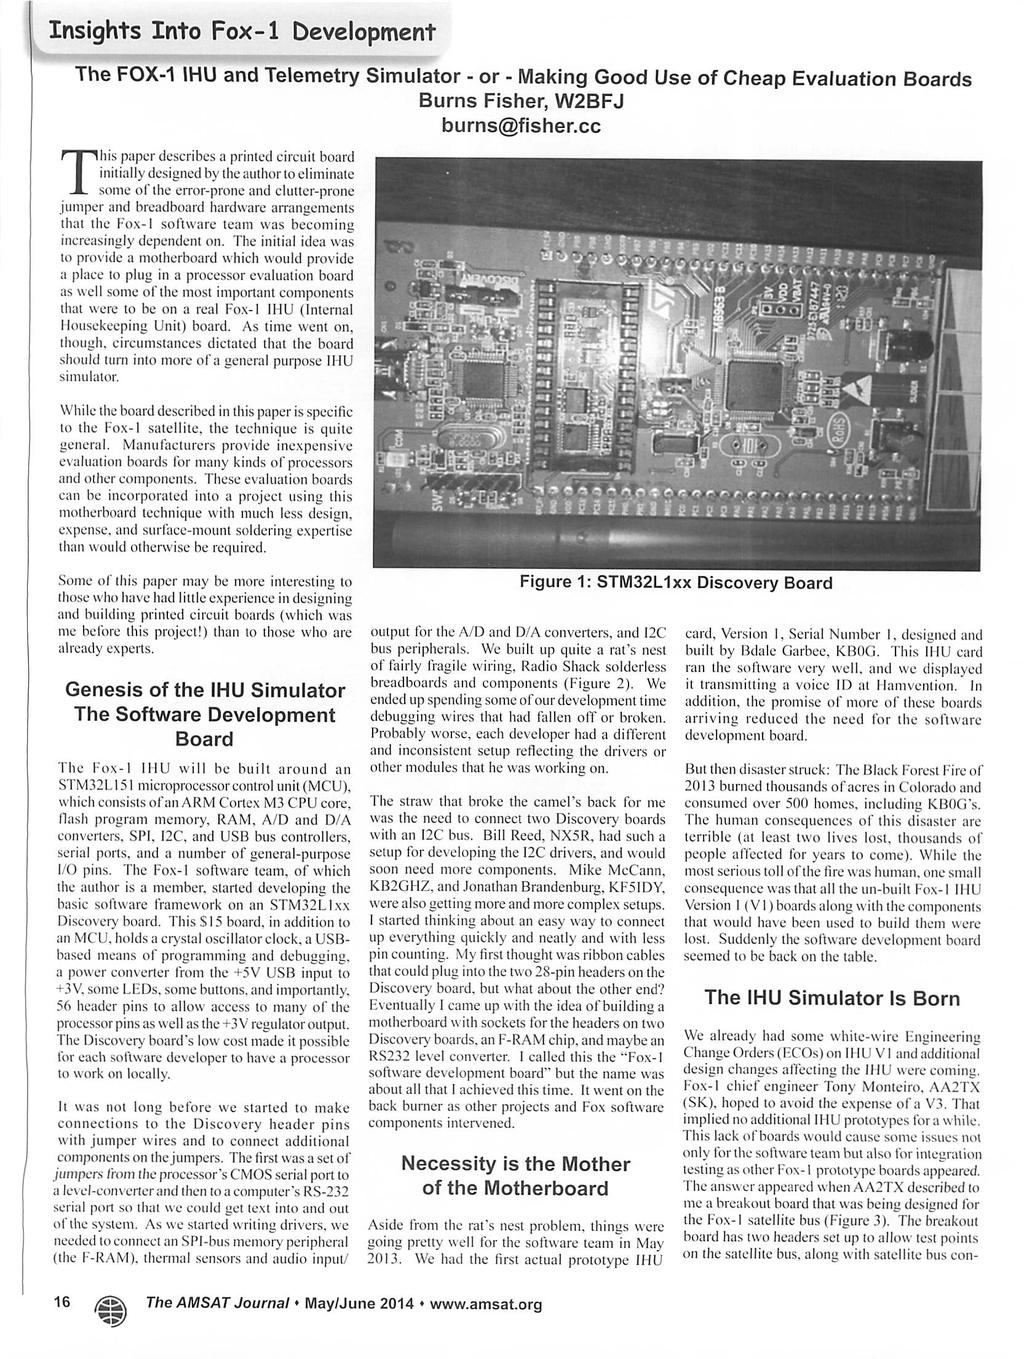 Insights Into Fox-1 Development The FOX-1 IHU and Telemetry Simulator - or - Making Good Use of Cheap Evaluation Boards Burns Fisher, W2BFJ burns@fisher.